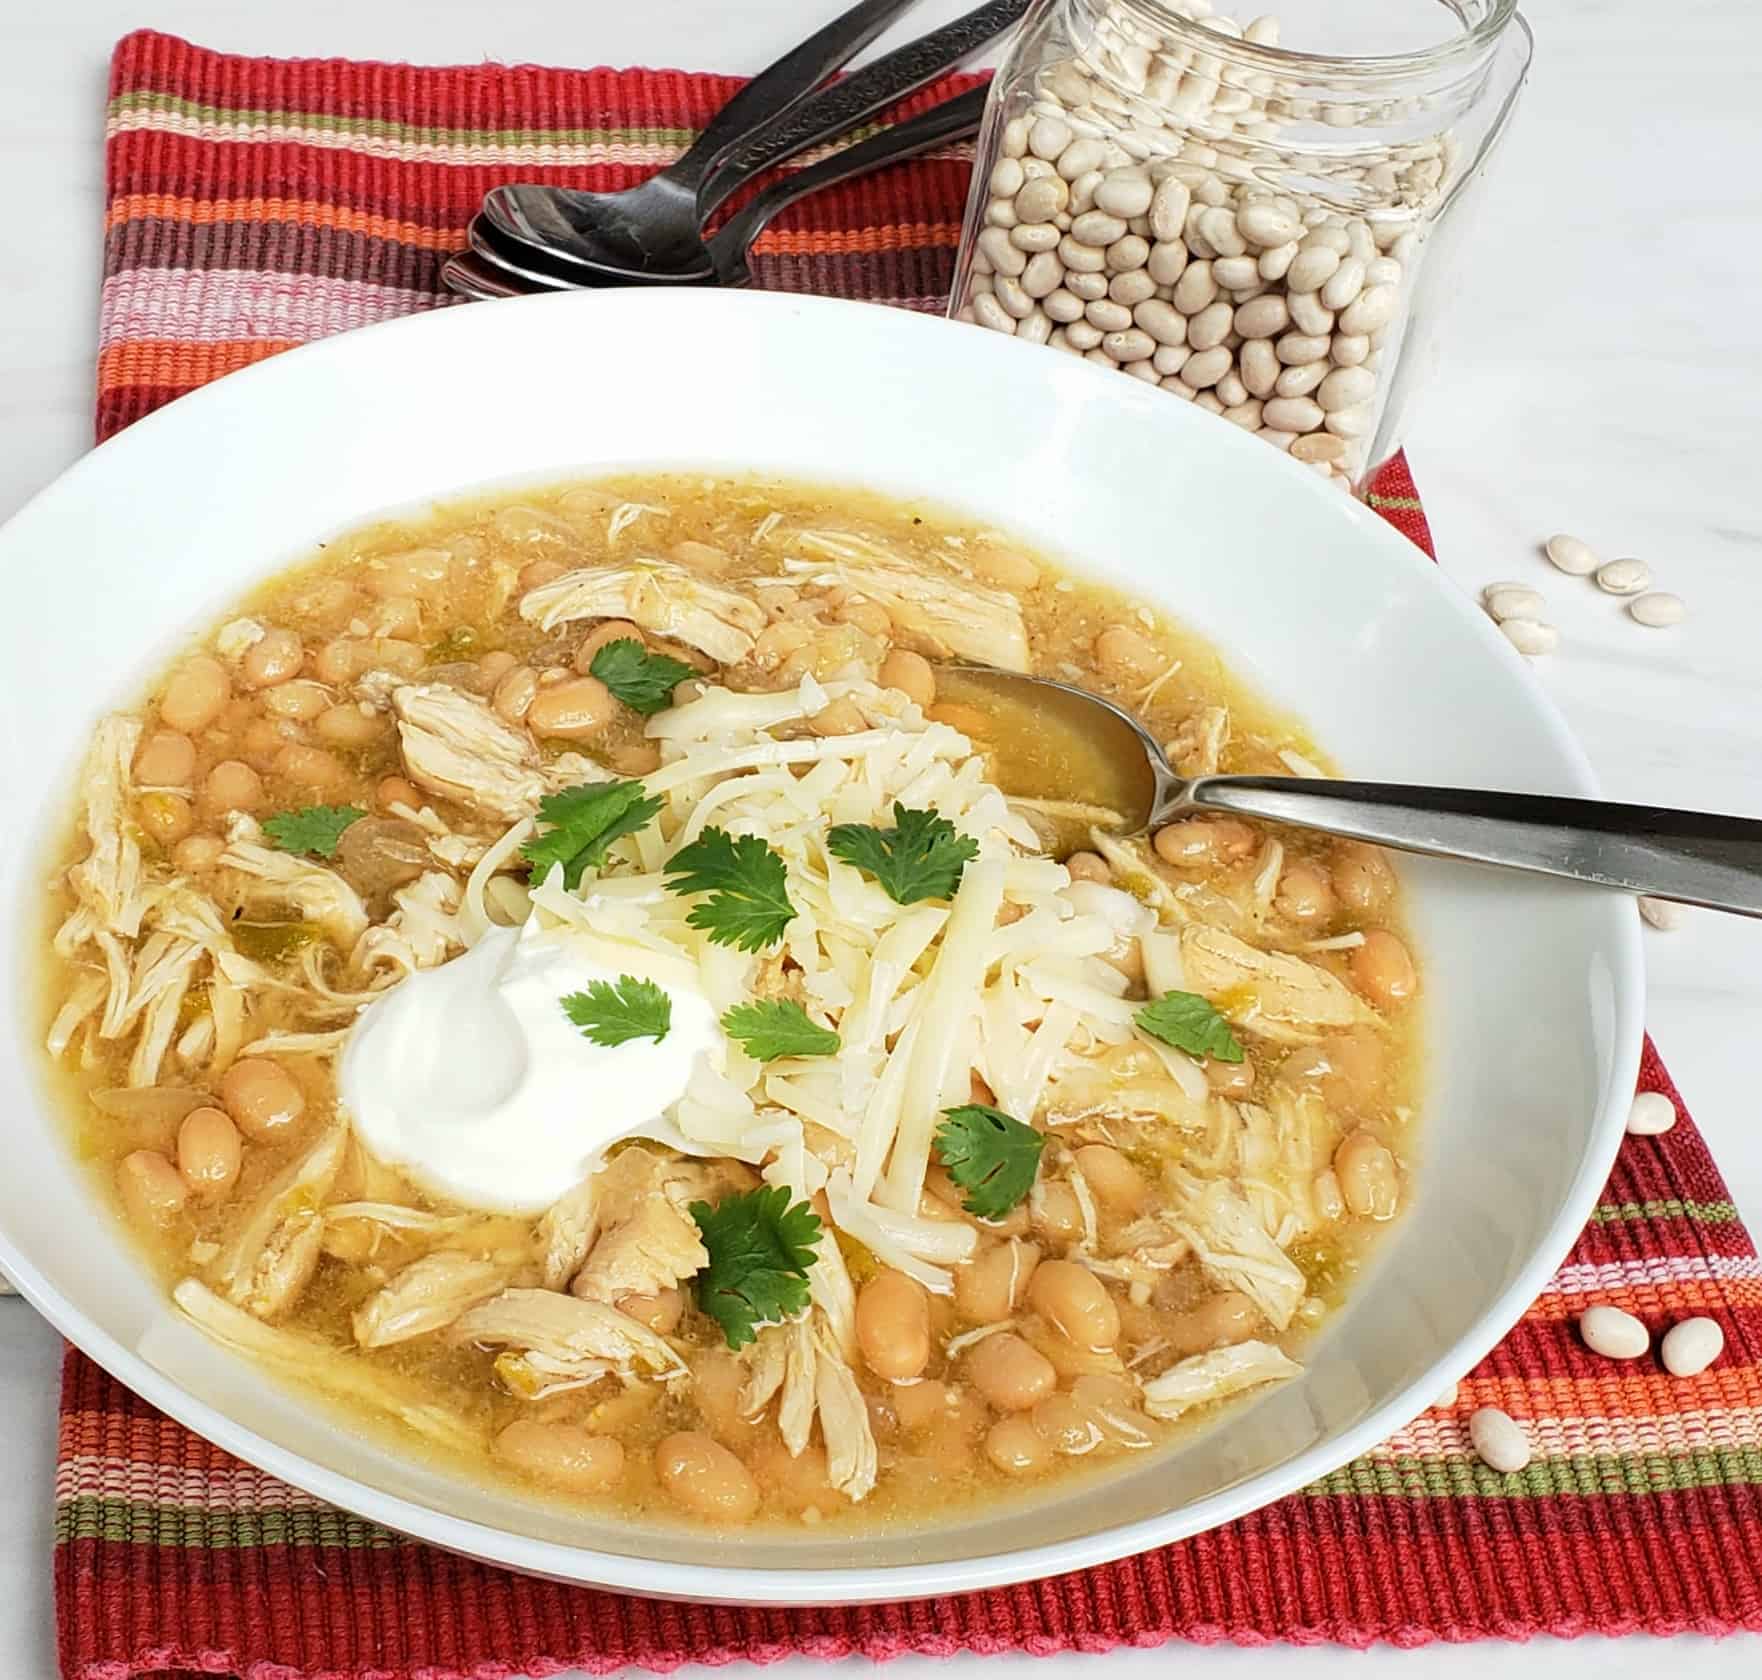 white bean chicken chili in white bowl on red cloth